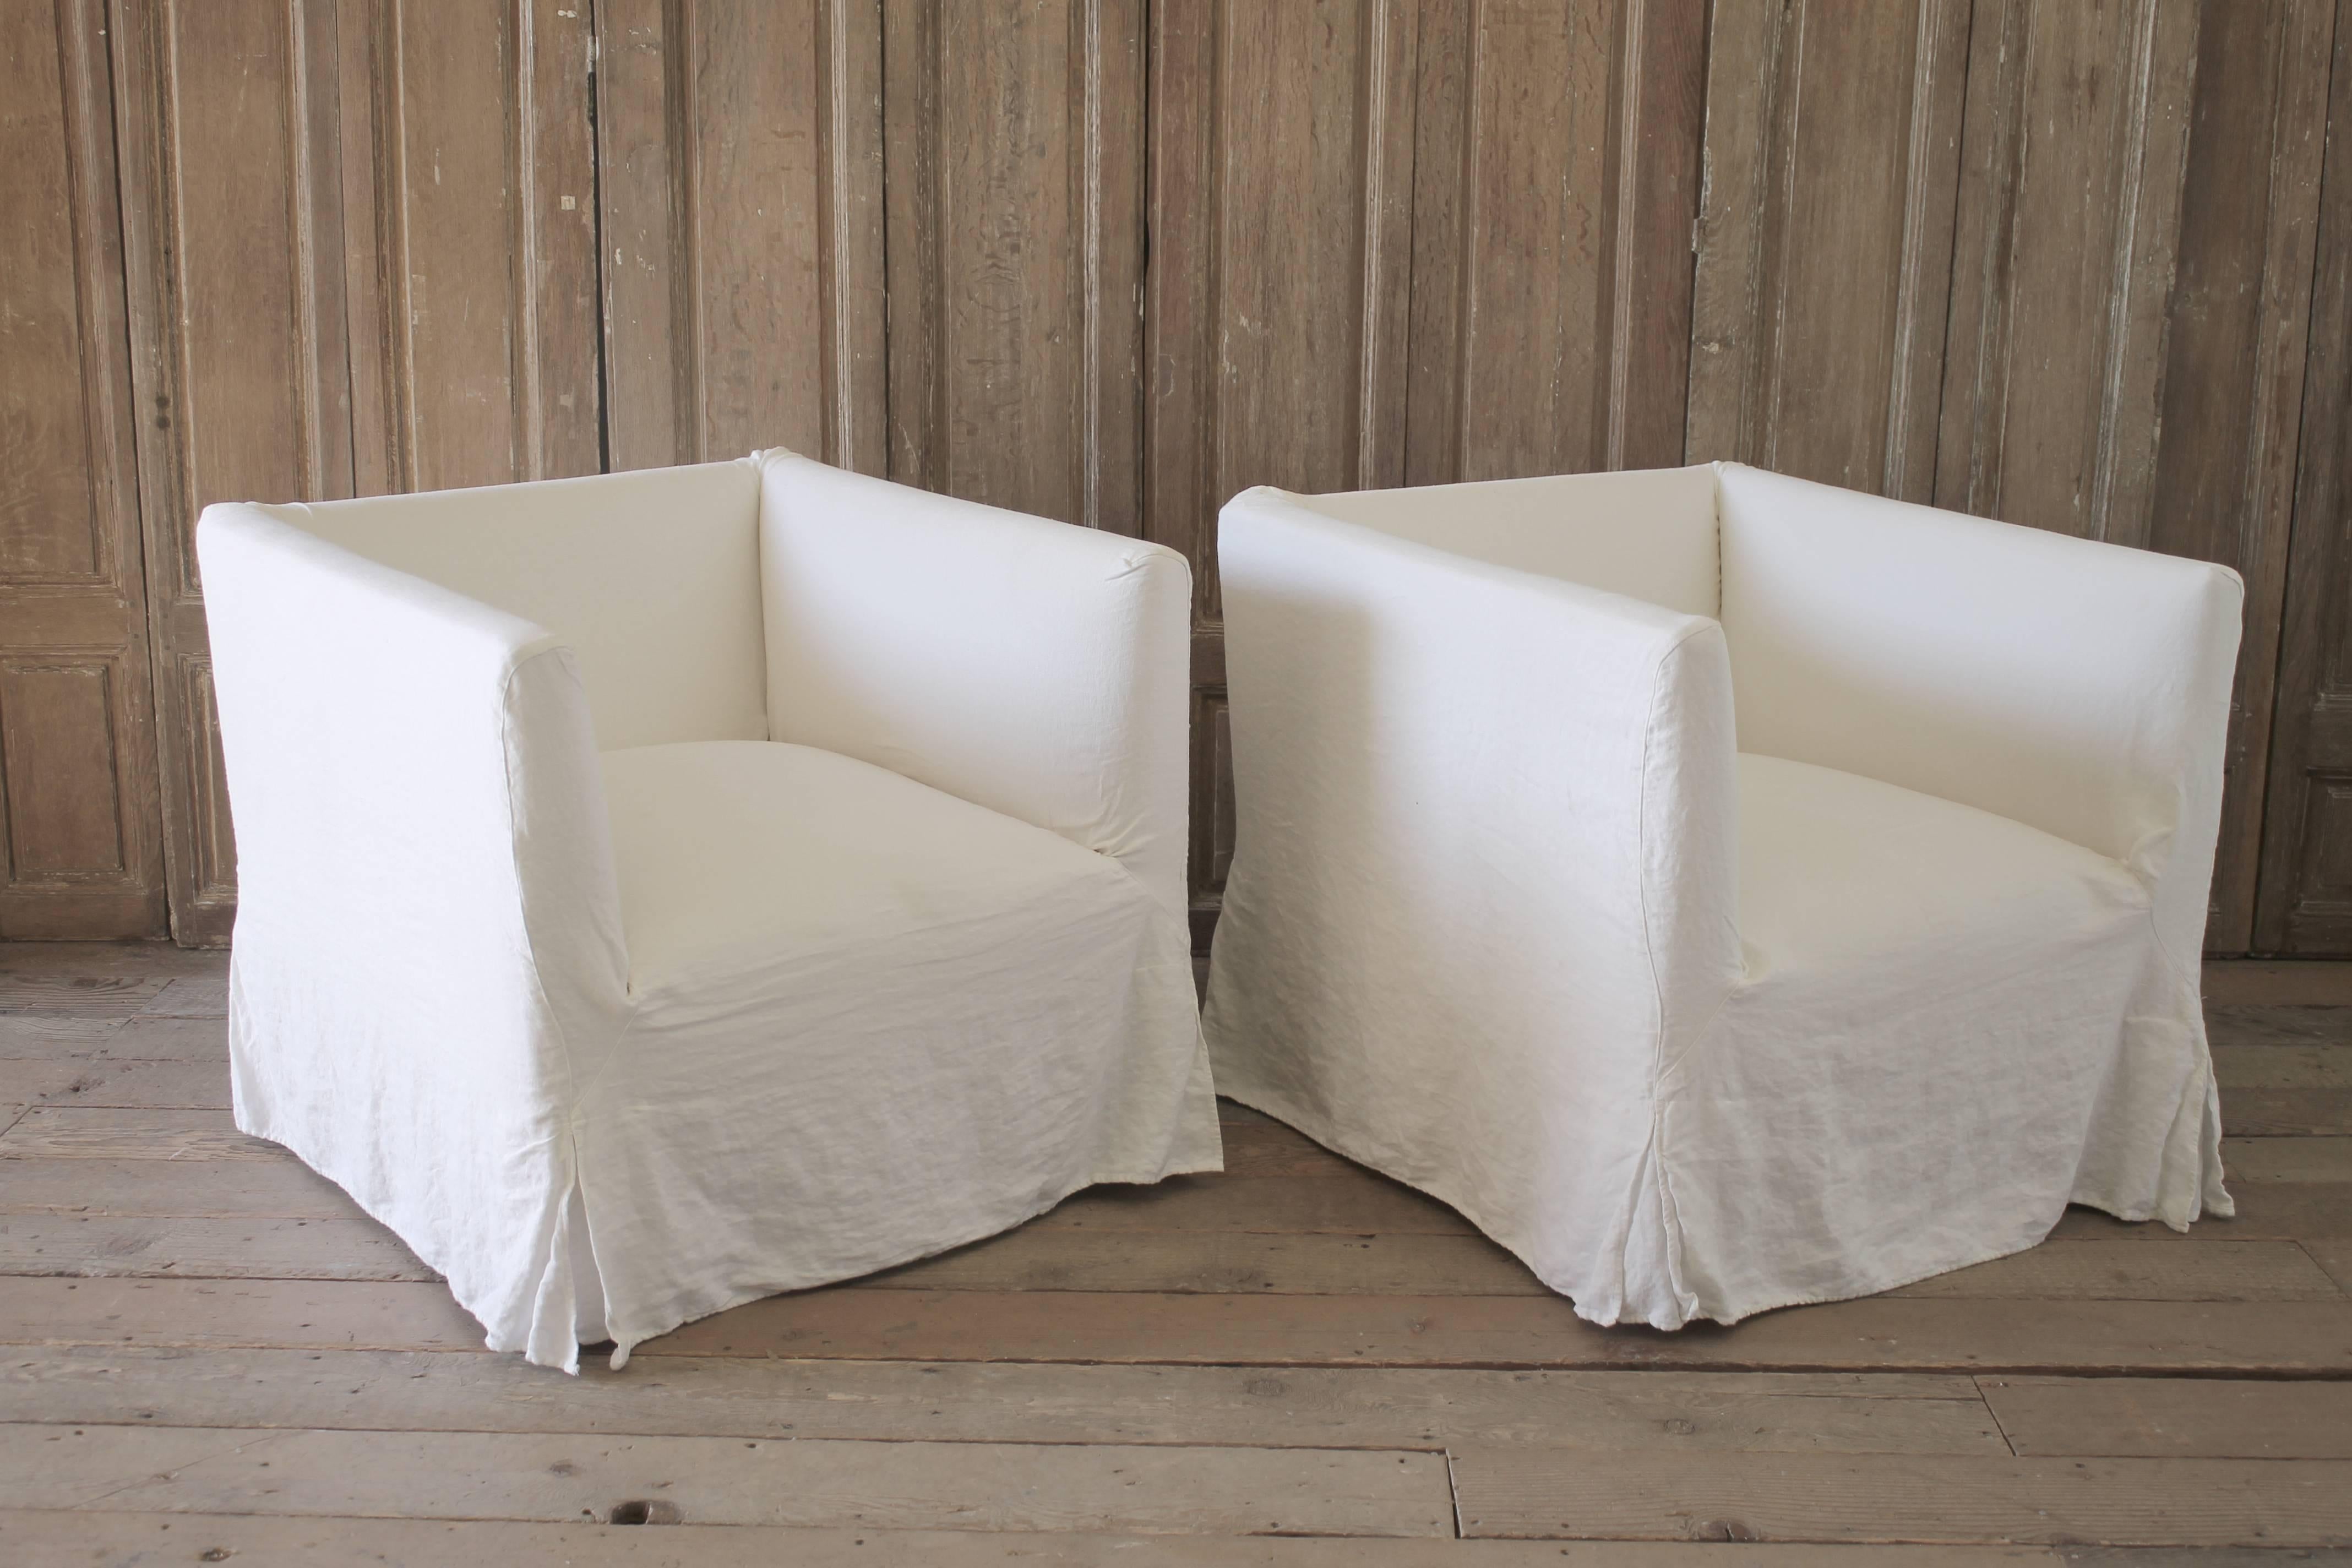 Pair of Linen Slip Covered Club Chairs with Wood Base
These have a newly reupholstered canvas upholstery with distressed wood carved base.  The linen slip covers are fairly newer, look clean, ready to use.
Tight seat, tight back, comfortable